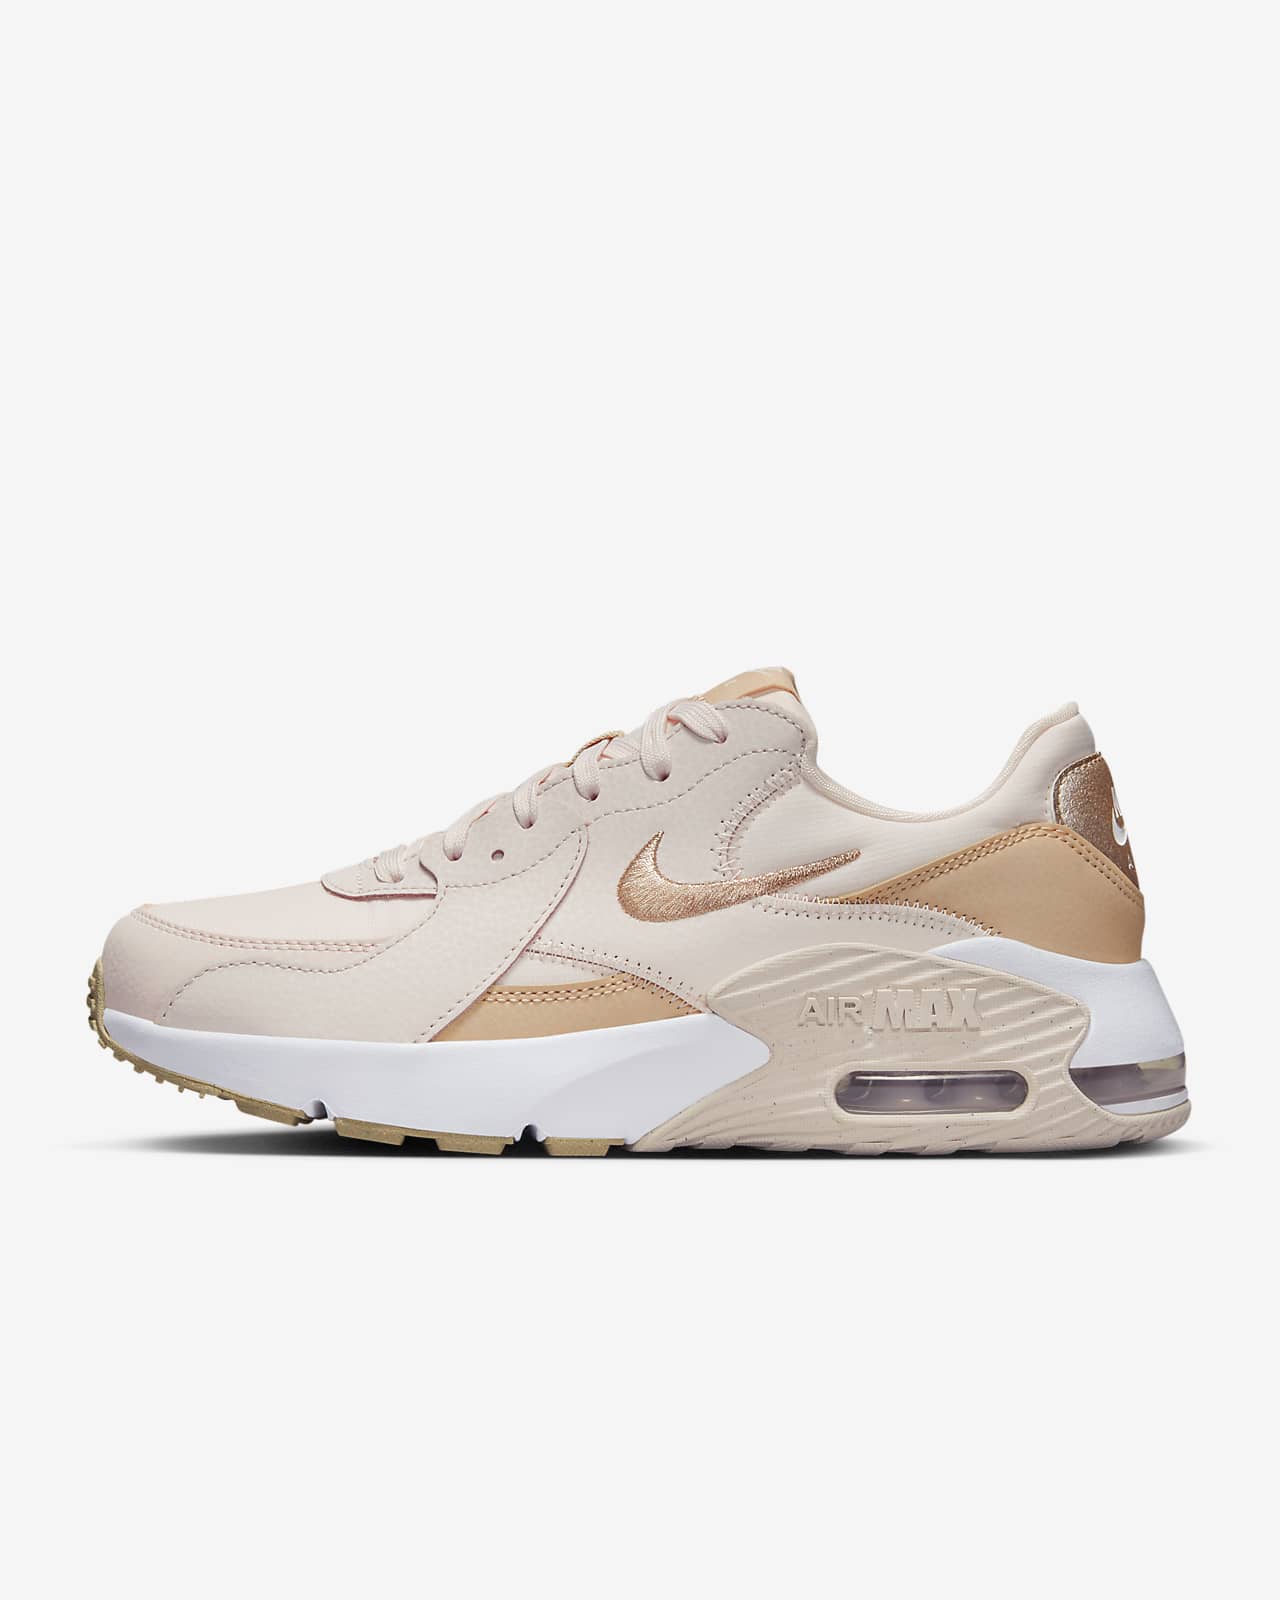 A faithful Suppression sharply Nike Air Max Excee Women's Shoes. Nike.com